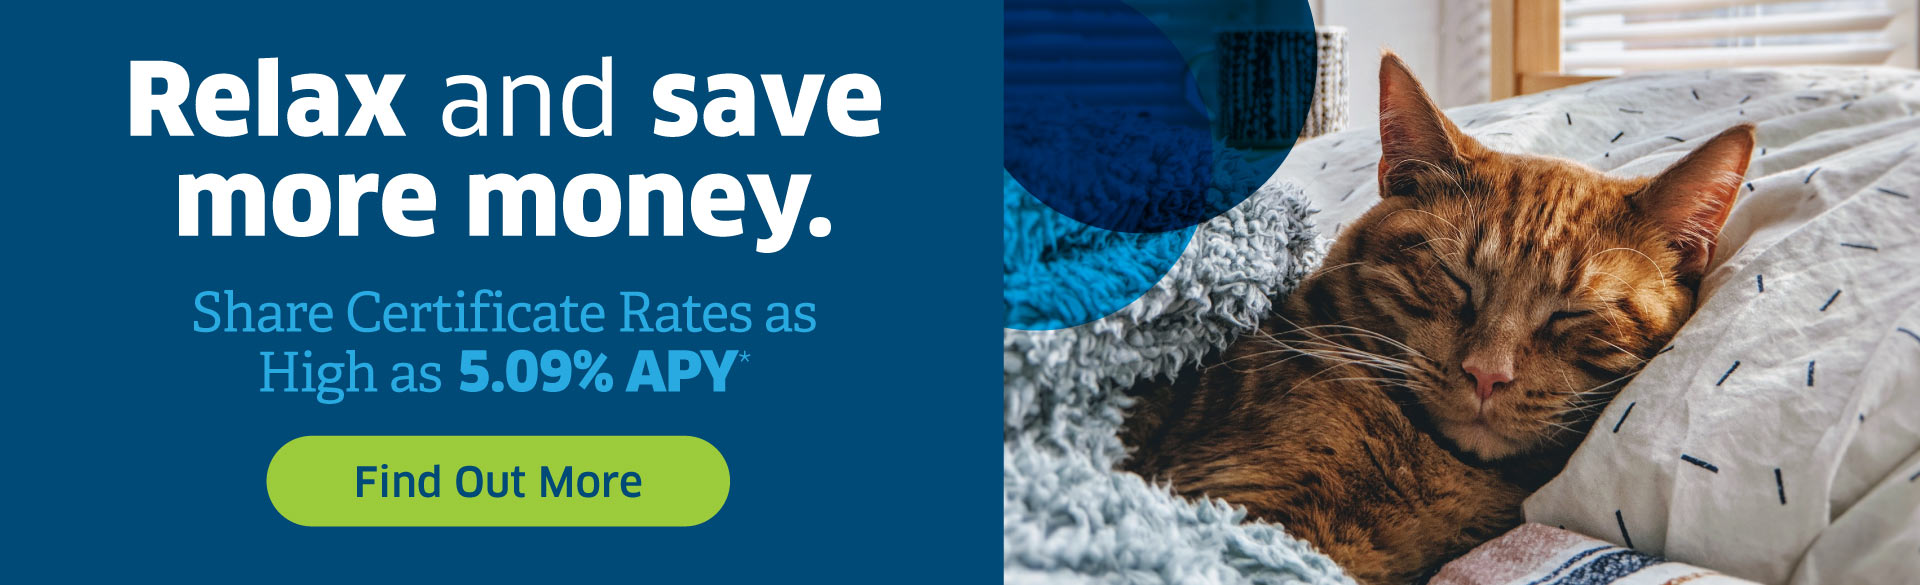 Relax and save more money with a share certificate